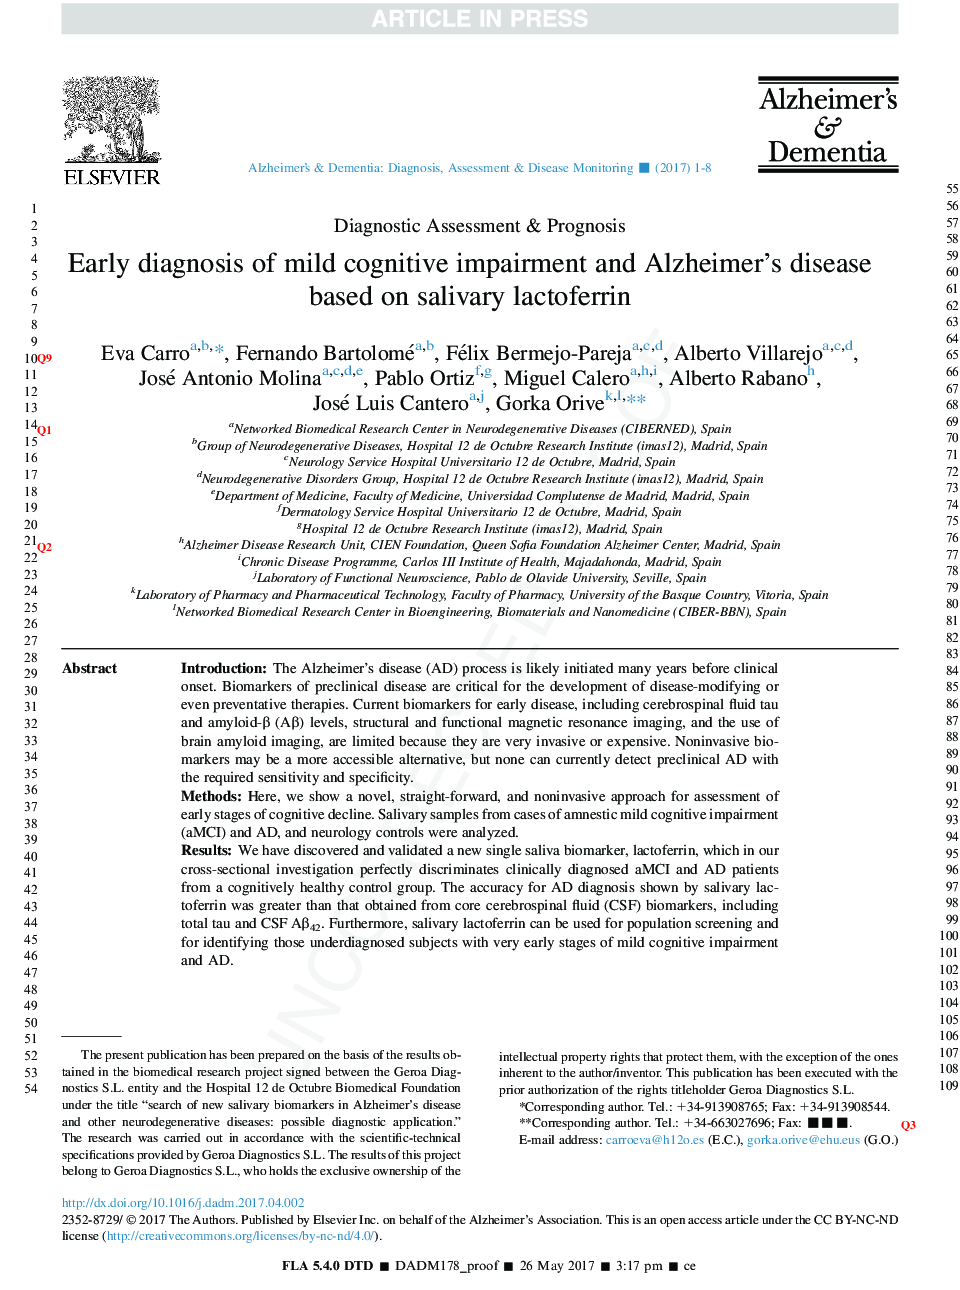 Early diagnosis of mild cognitive impairment and Alzheimer's disease based on salivary lactoferrin